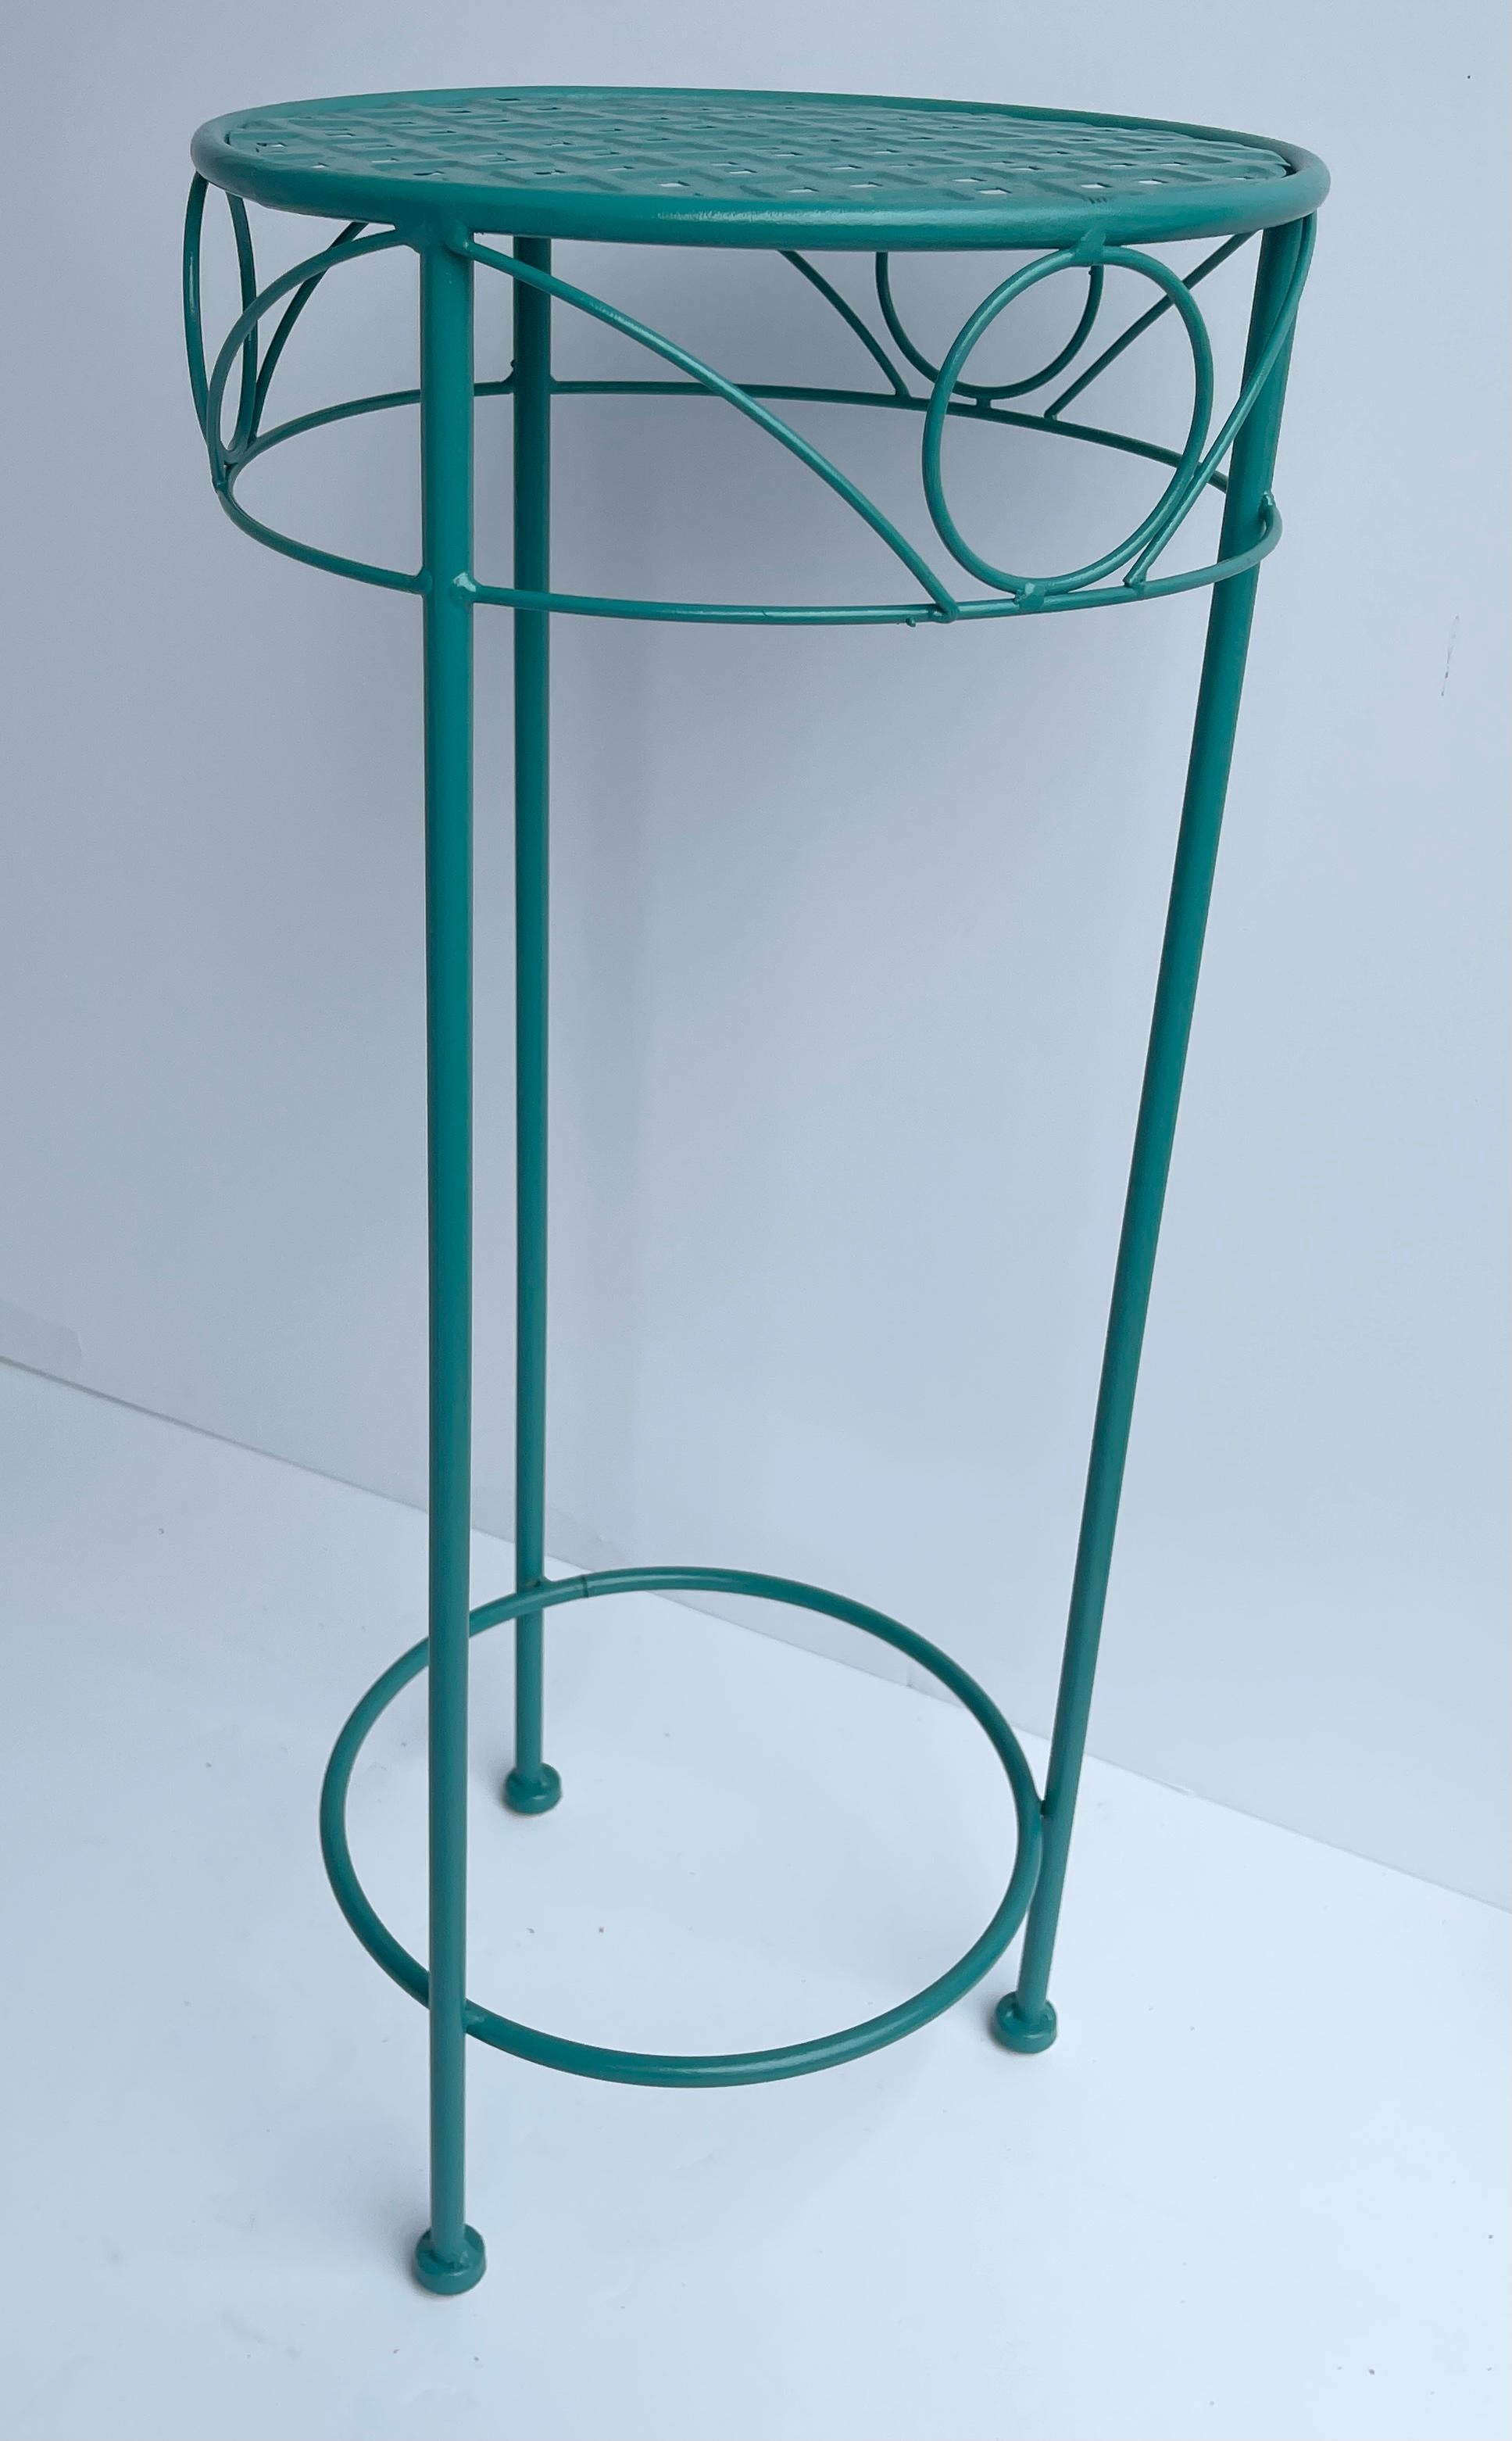 American Mid-Century Modern Plant Stand, Powder Coated Turquoise